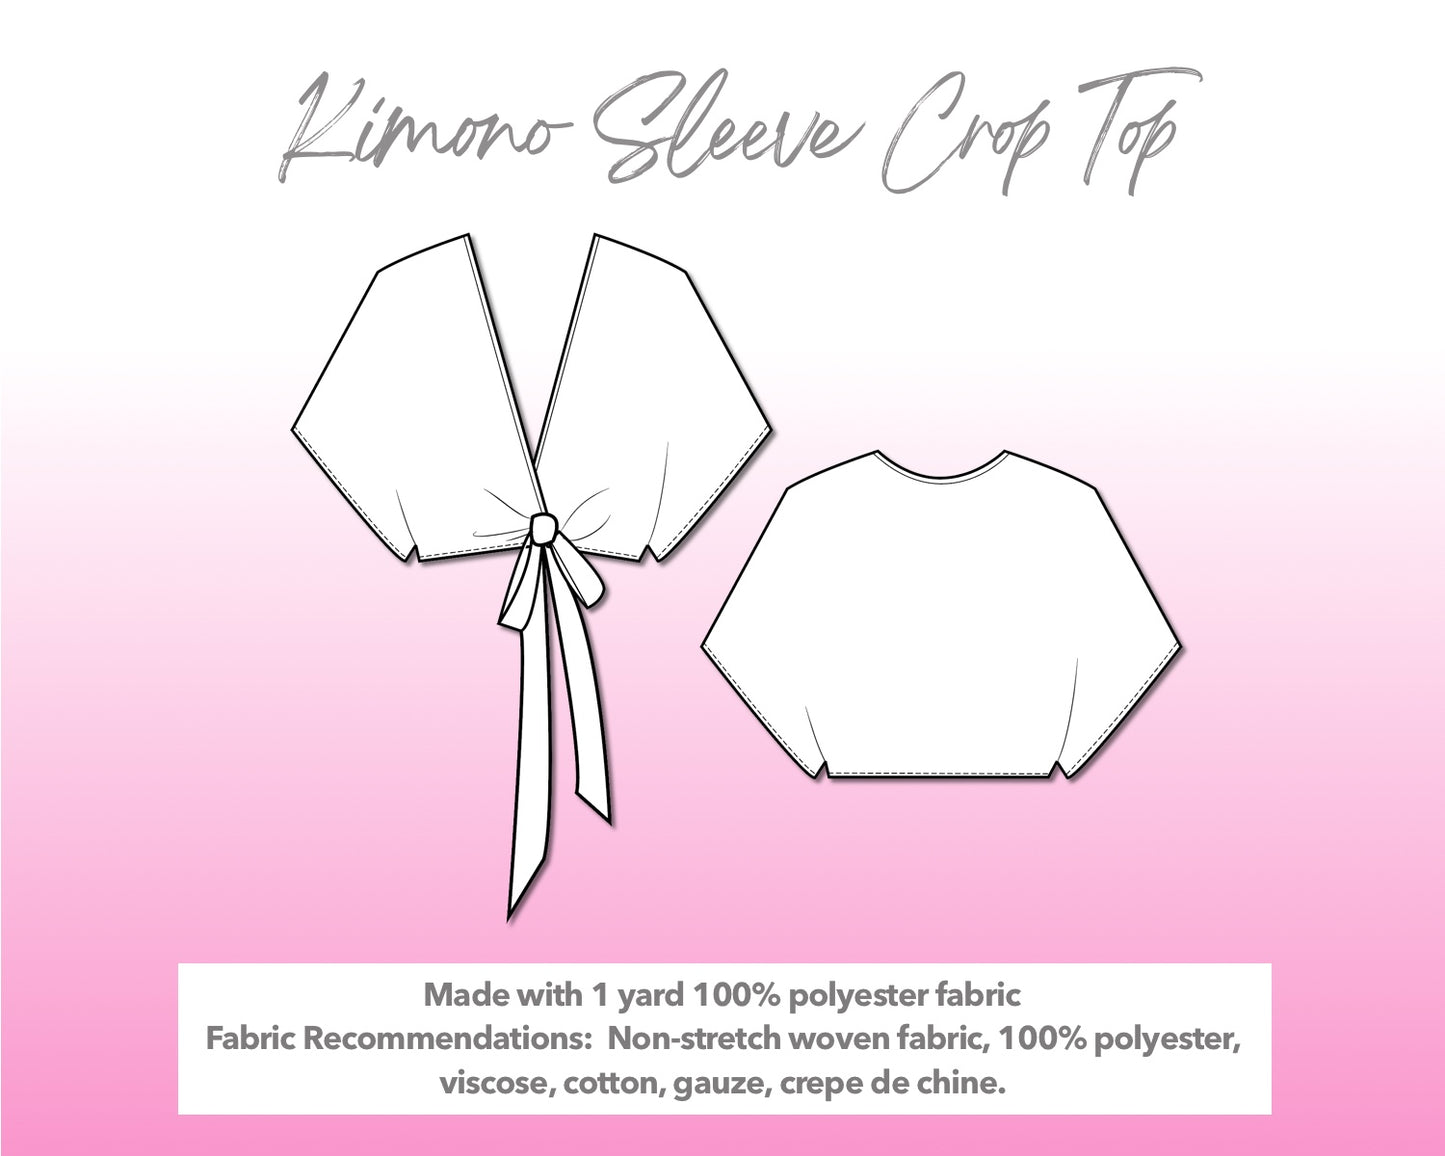 Illustration and detailed description for Kimono Sleeve Front Tie Crop Top sewing pattern.